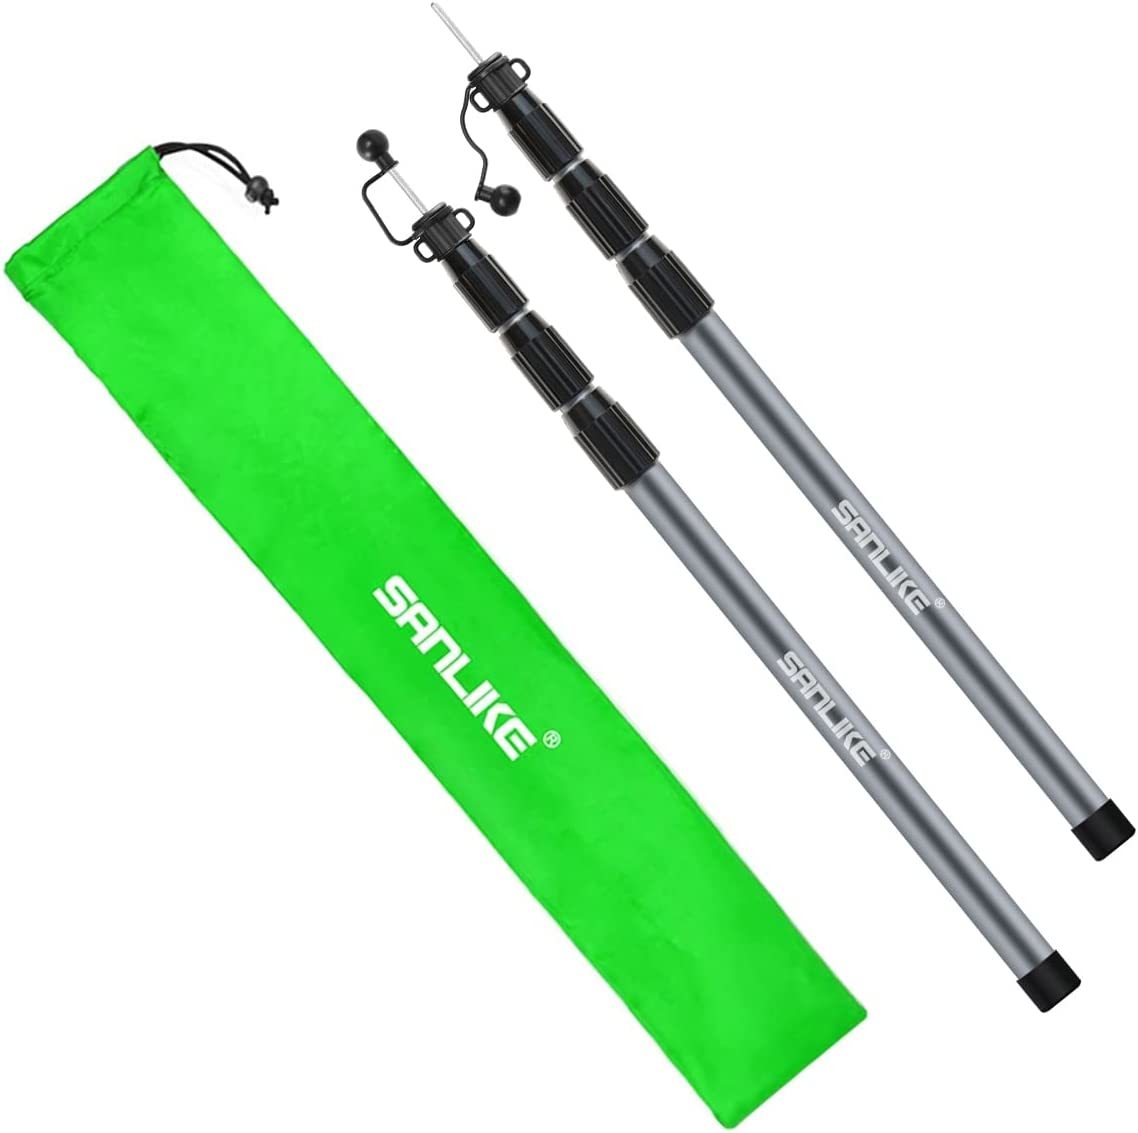 Primary image for Telescoping Tarp Poles 98.5In Aluminum Camping Tent Poles, Tent, And 1 Bag.